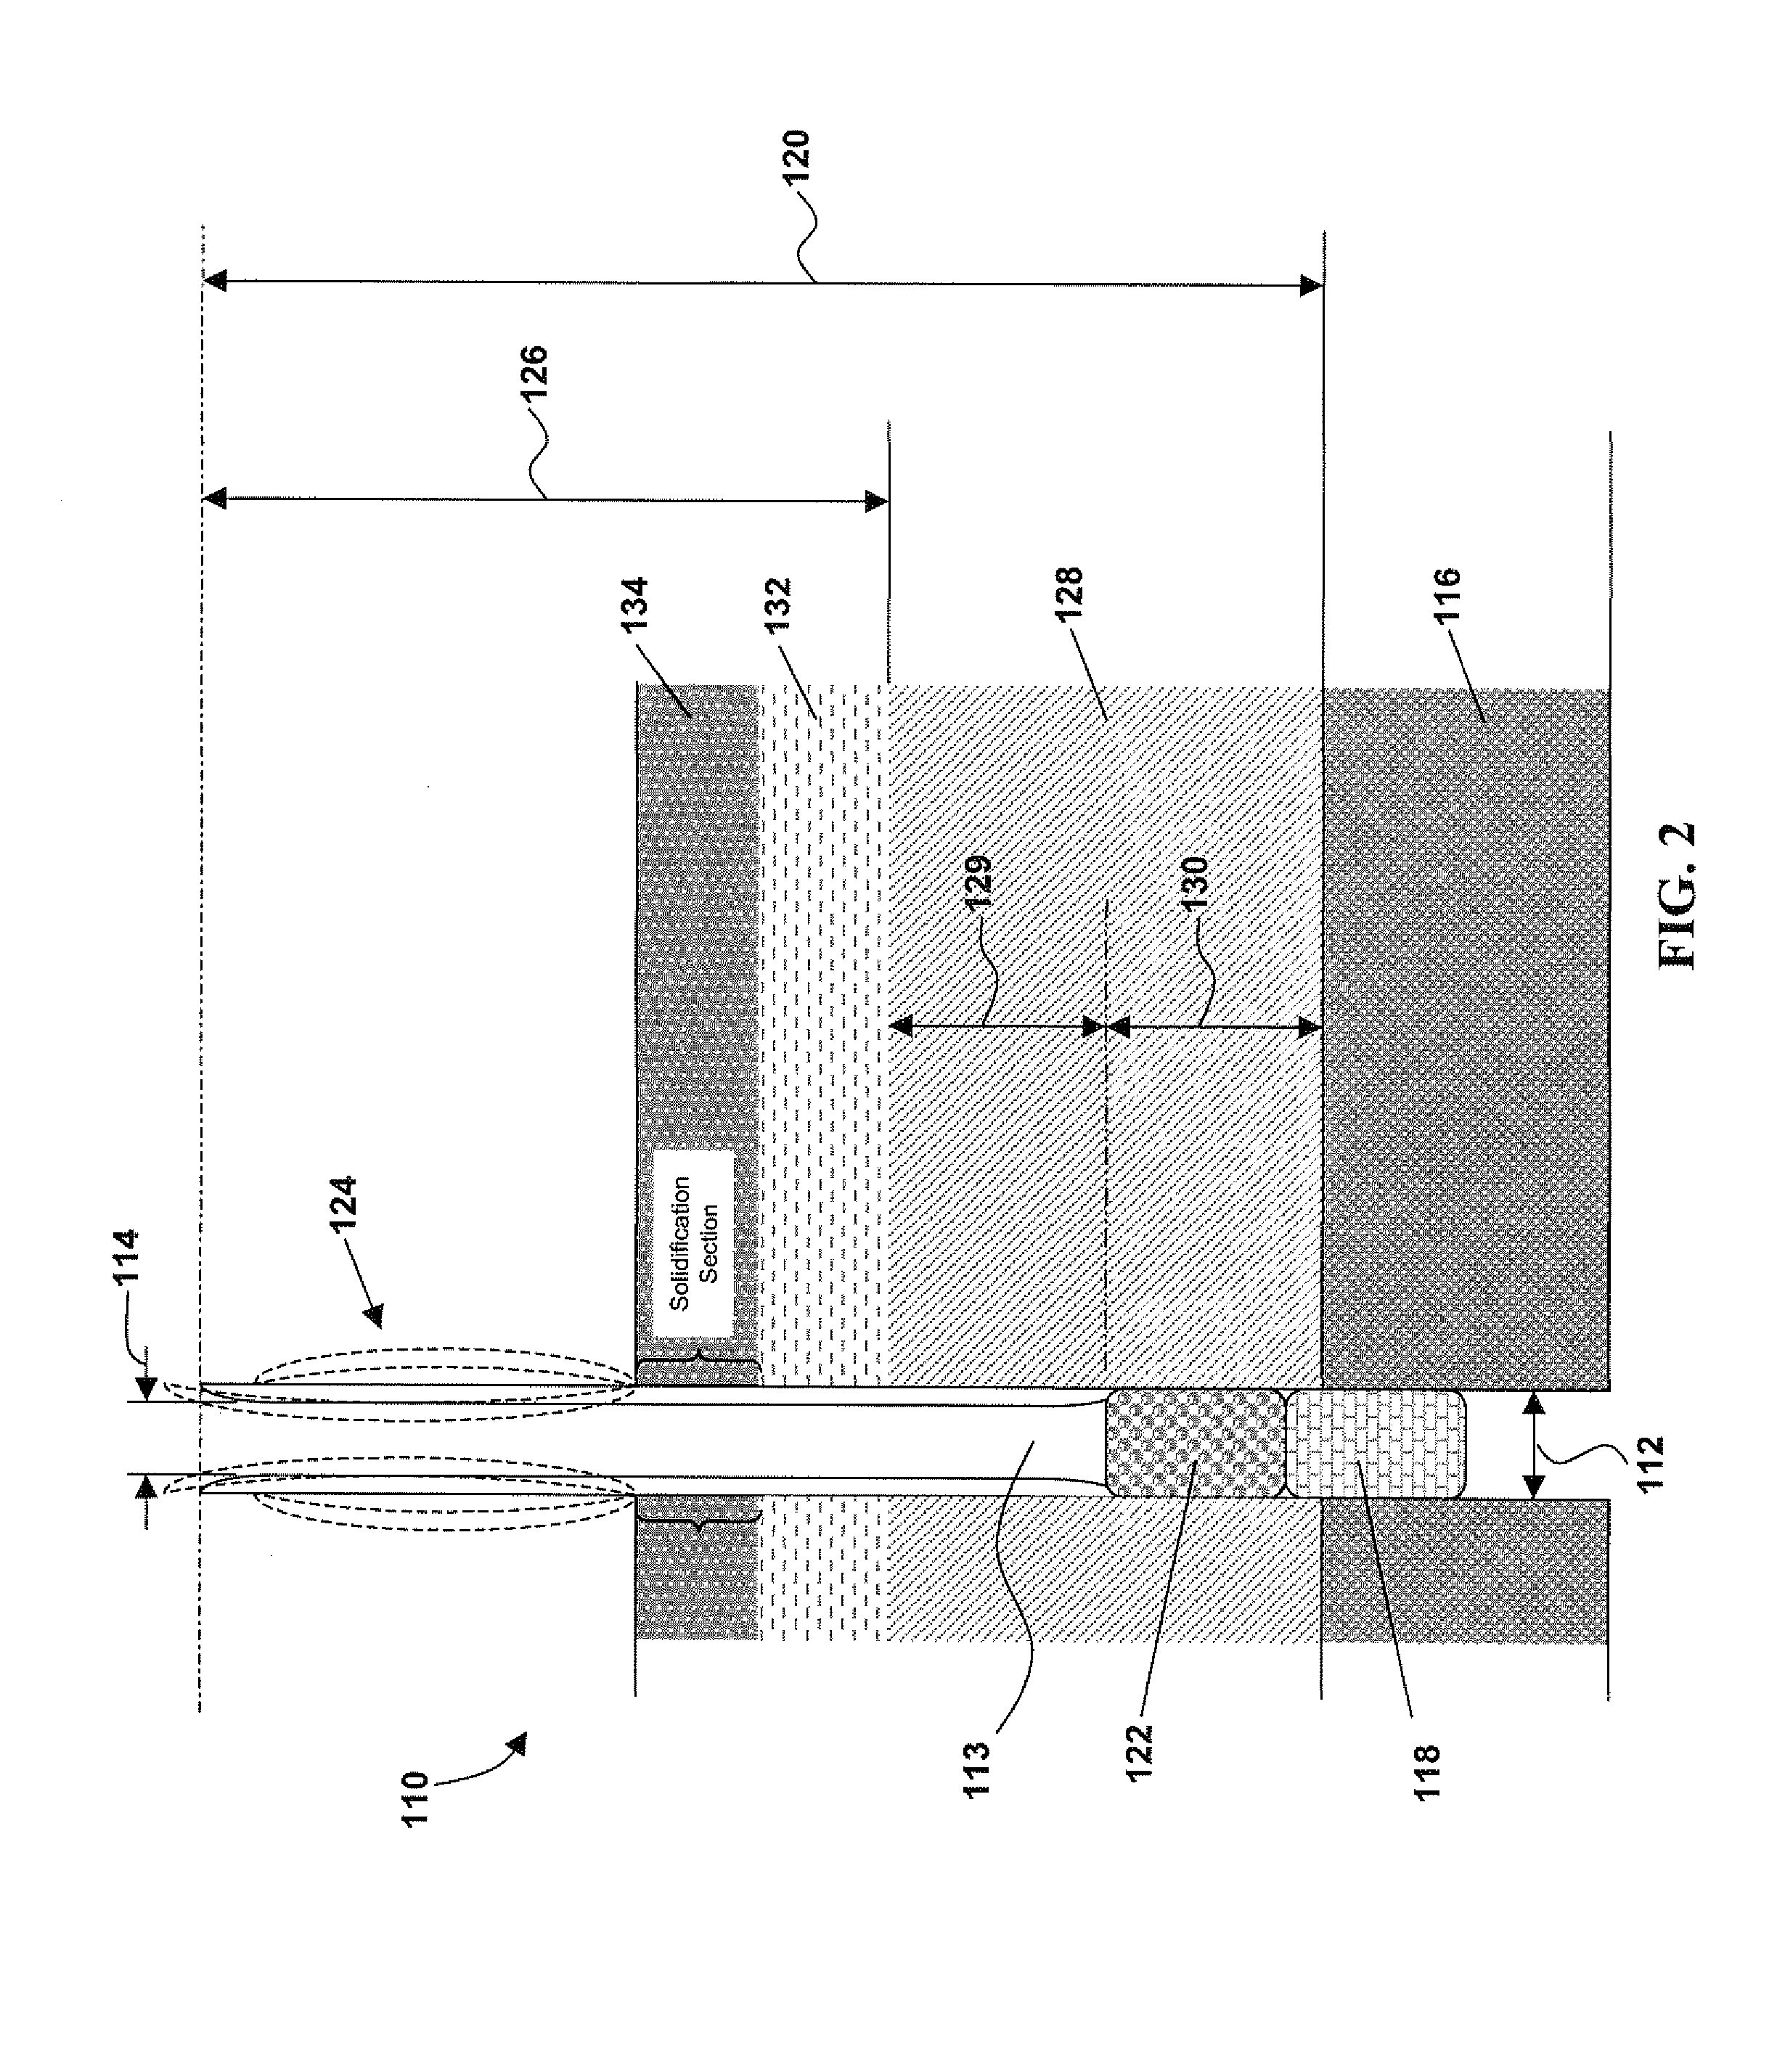 Carbon Nanotube (CNT) Extrusion Methods And CNT Wire And Composites